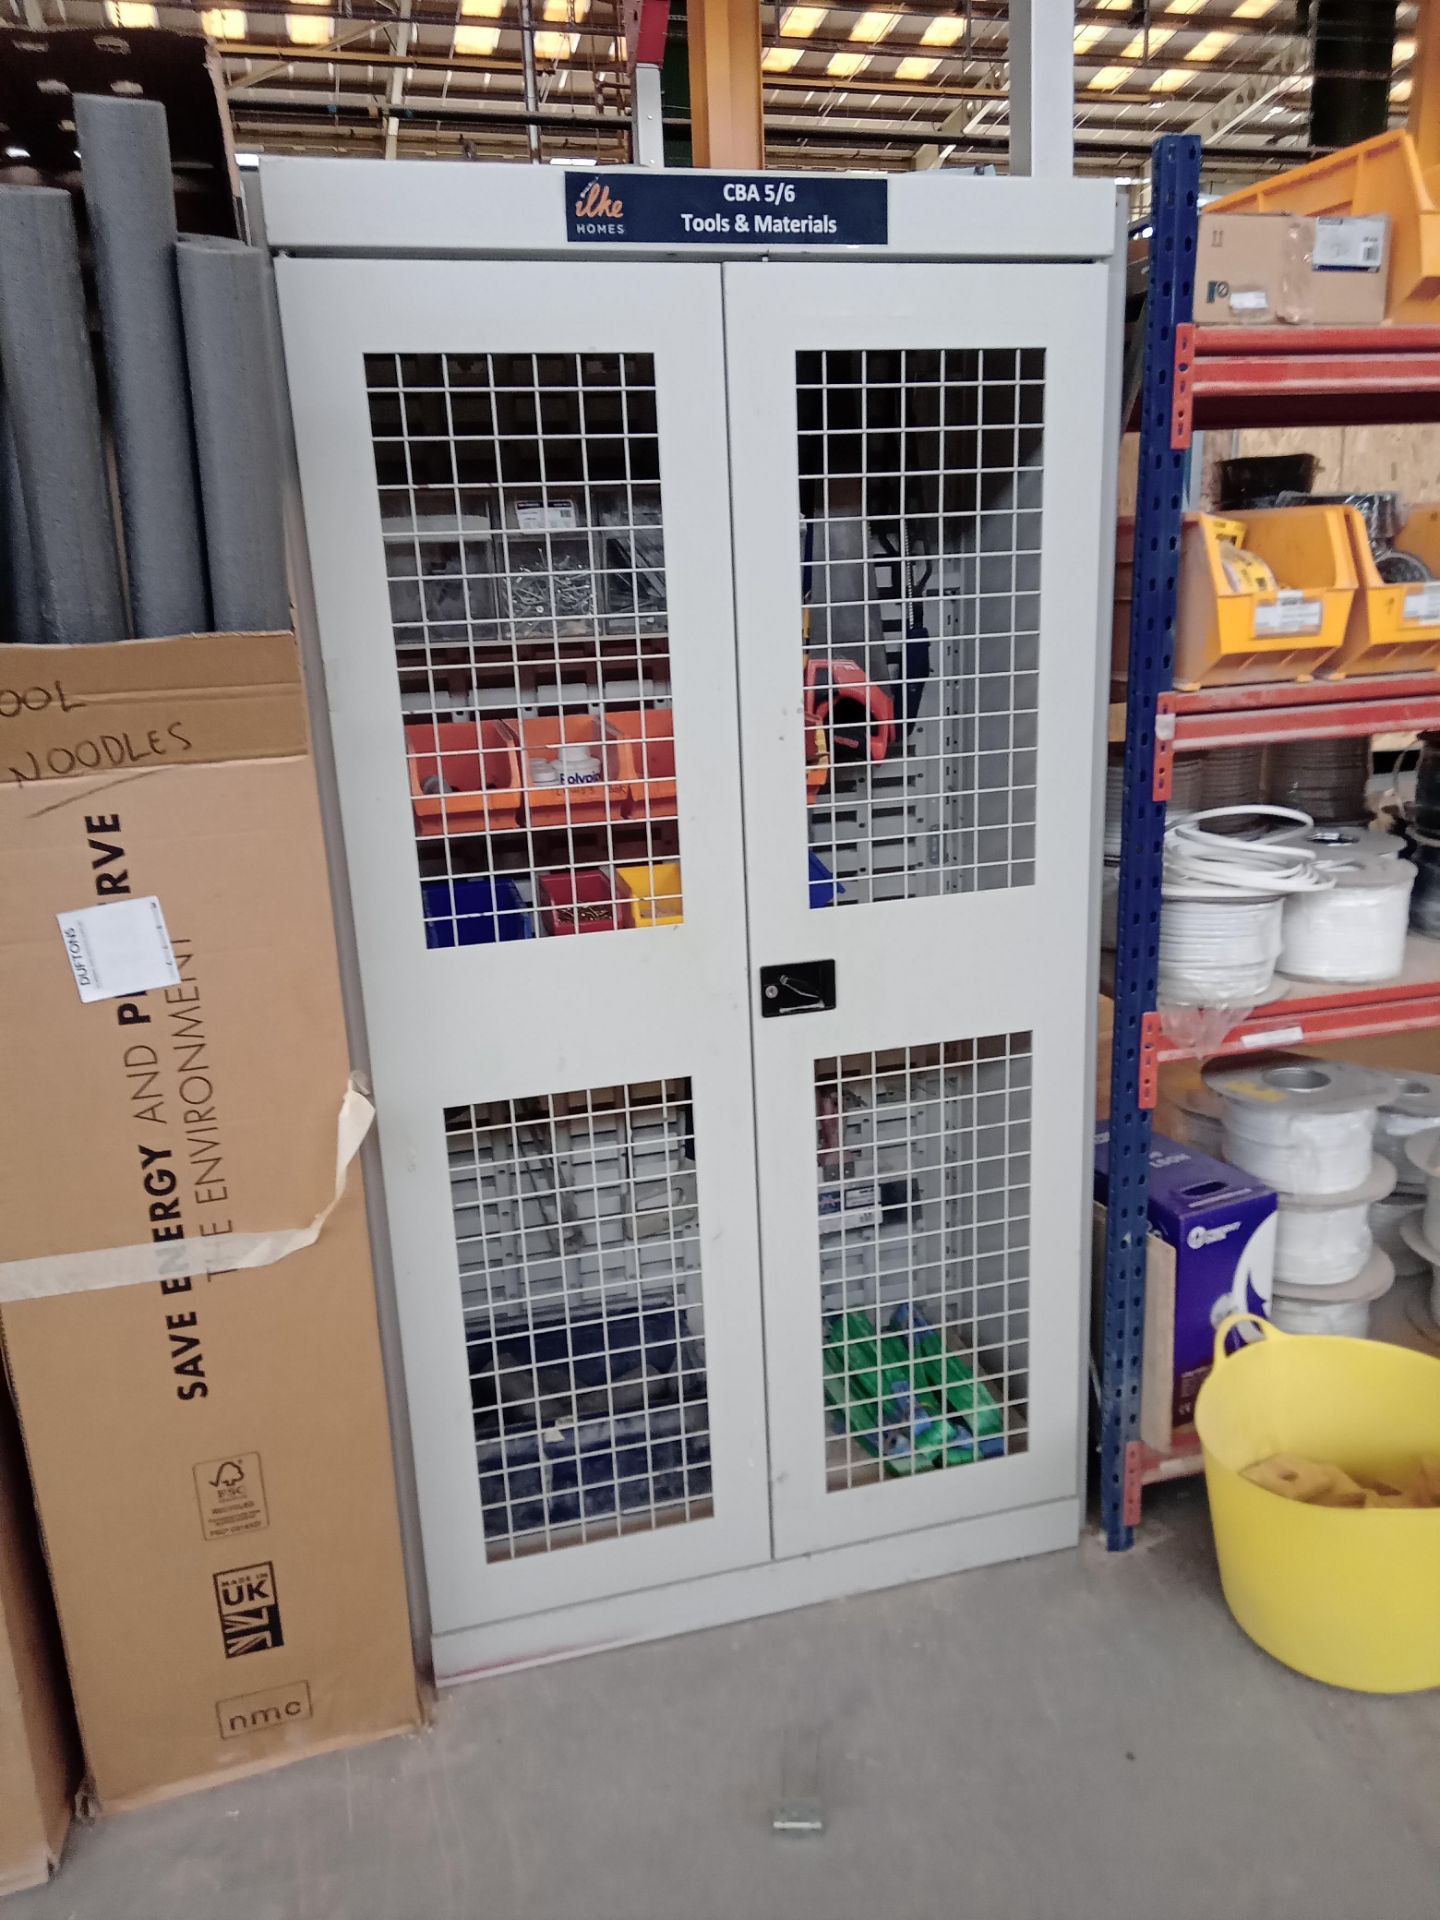 Steel Cupboard and contents